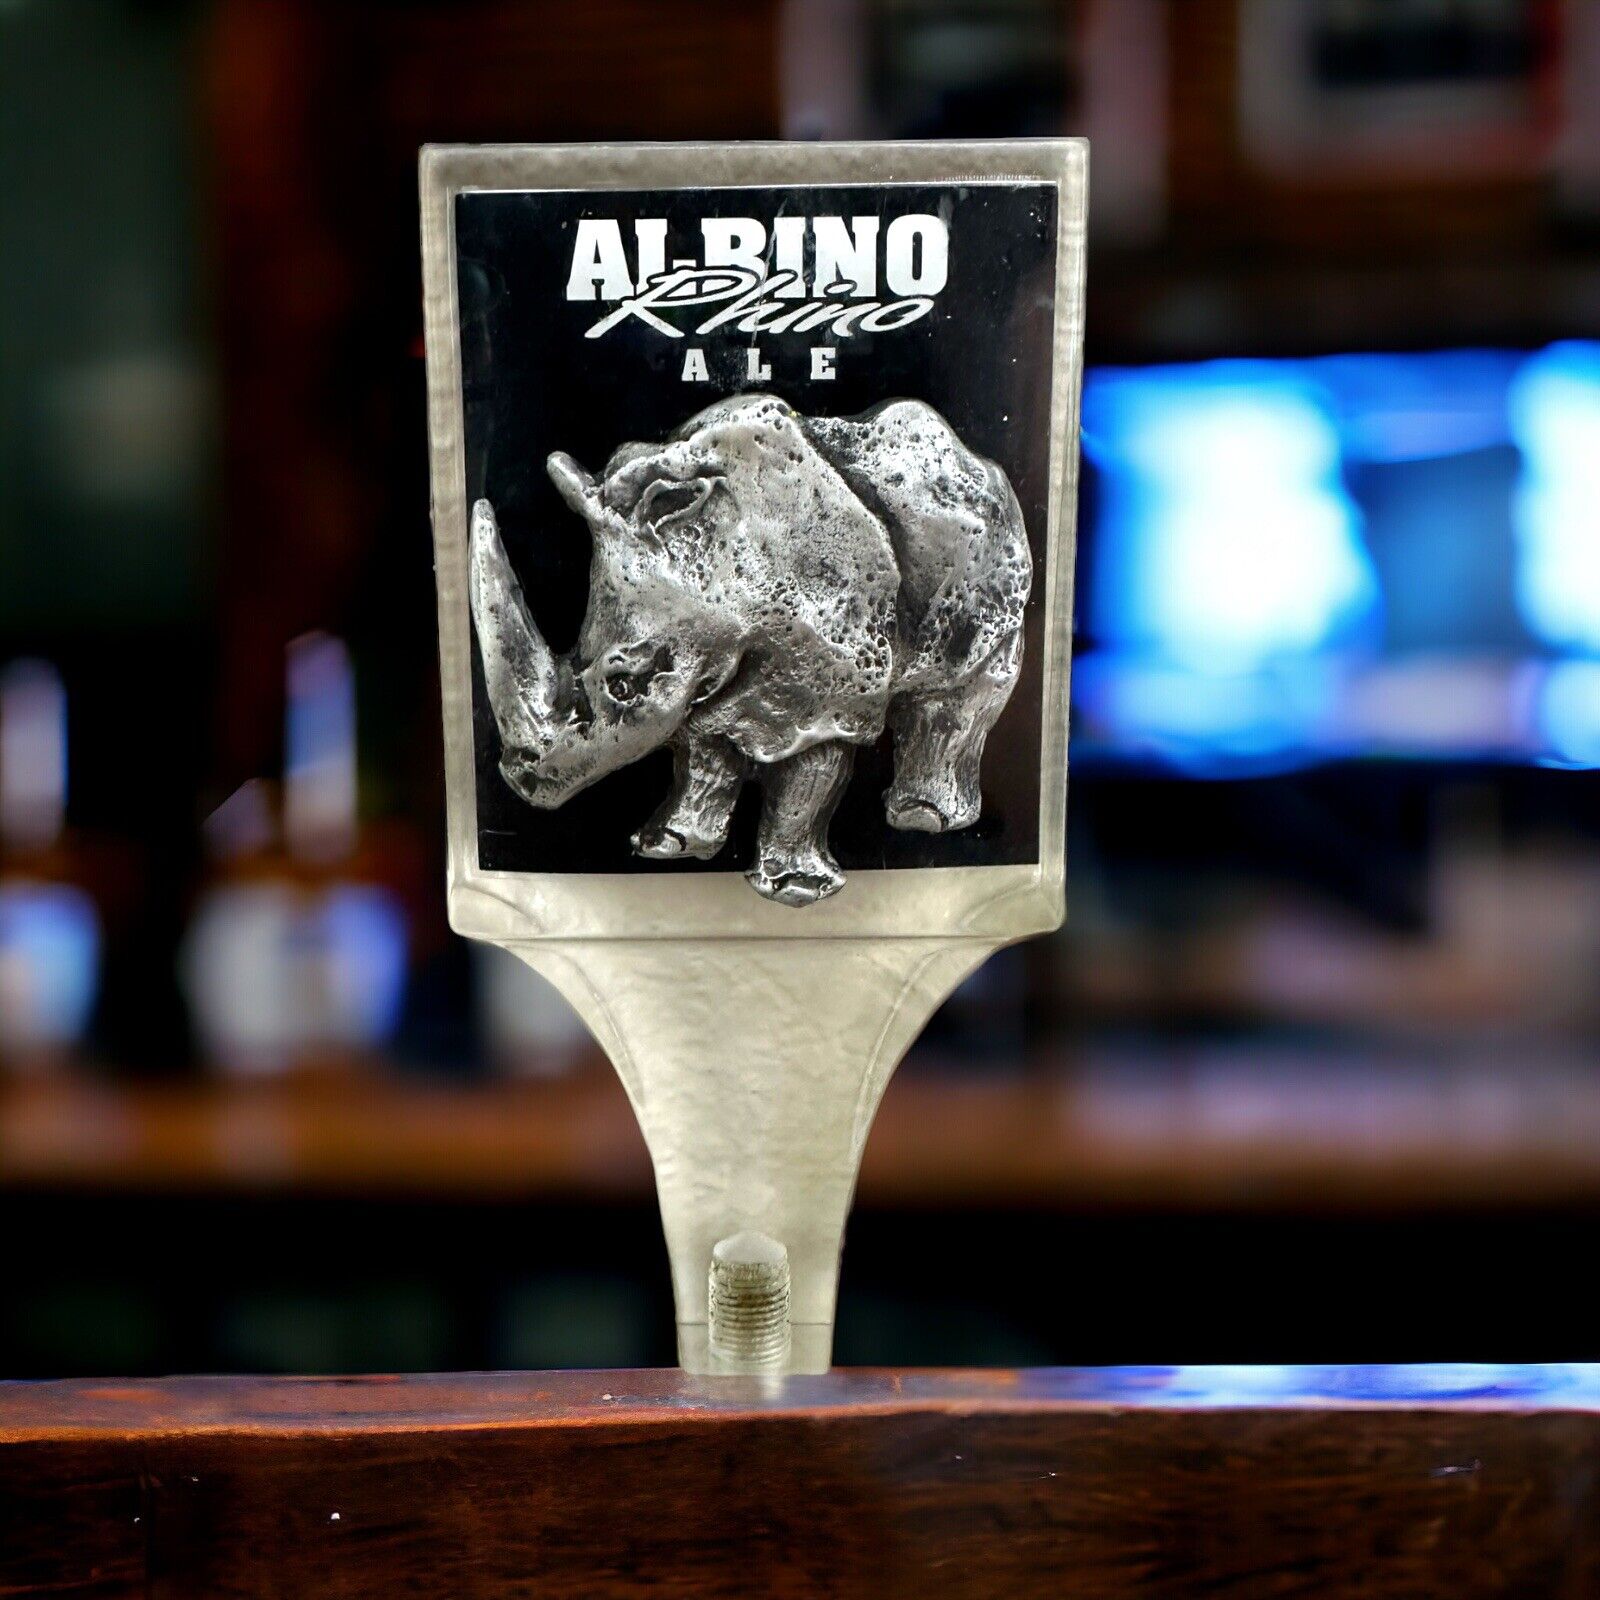 Albino Rhino Ale Beer Tap Handle Lucite 10 inch Big Rock Brewery Rare Very cool